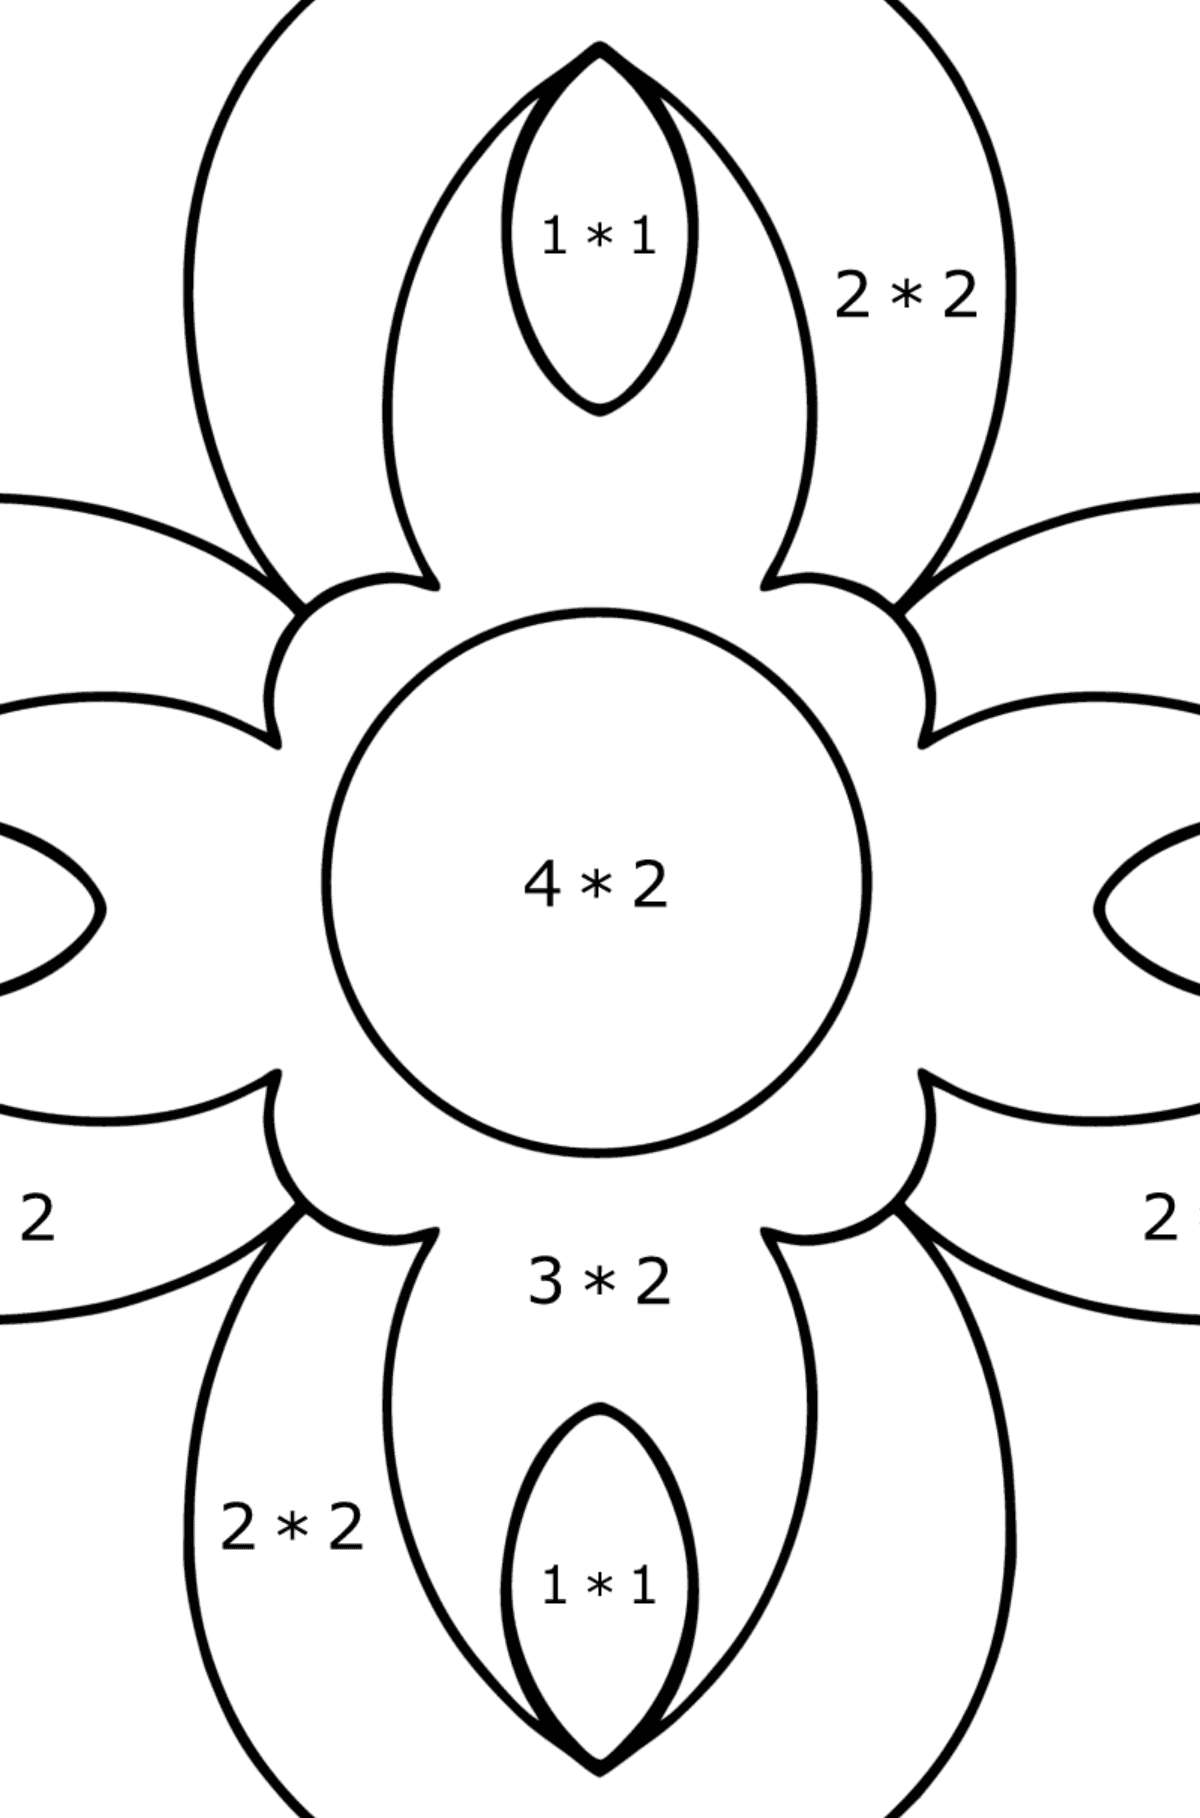 Coloring book for kids - Anti stress flower - Math Coloring - Multiplication for Kids